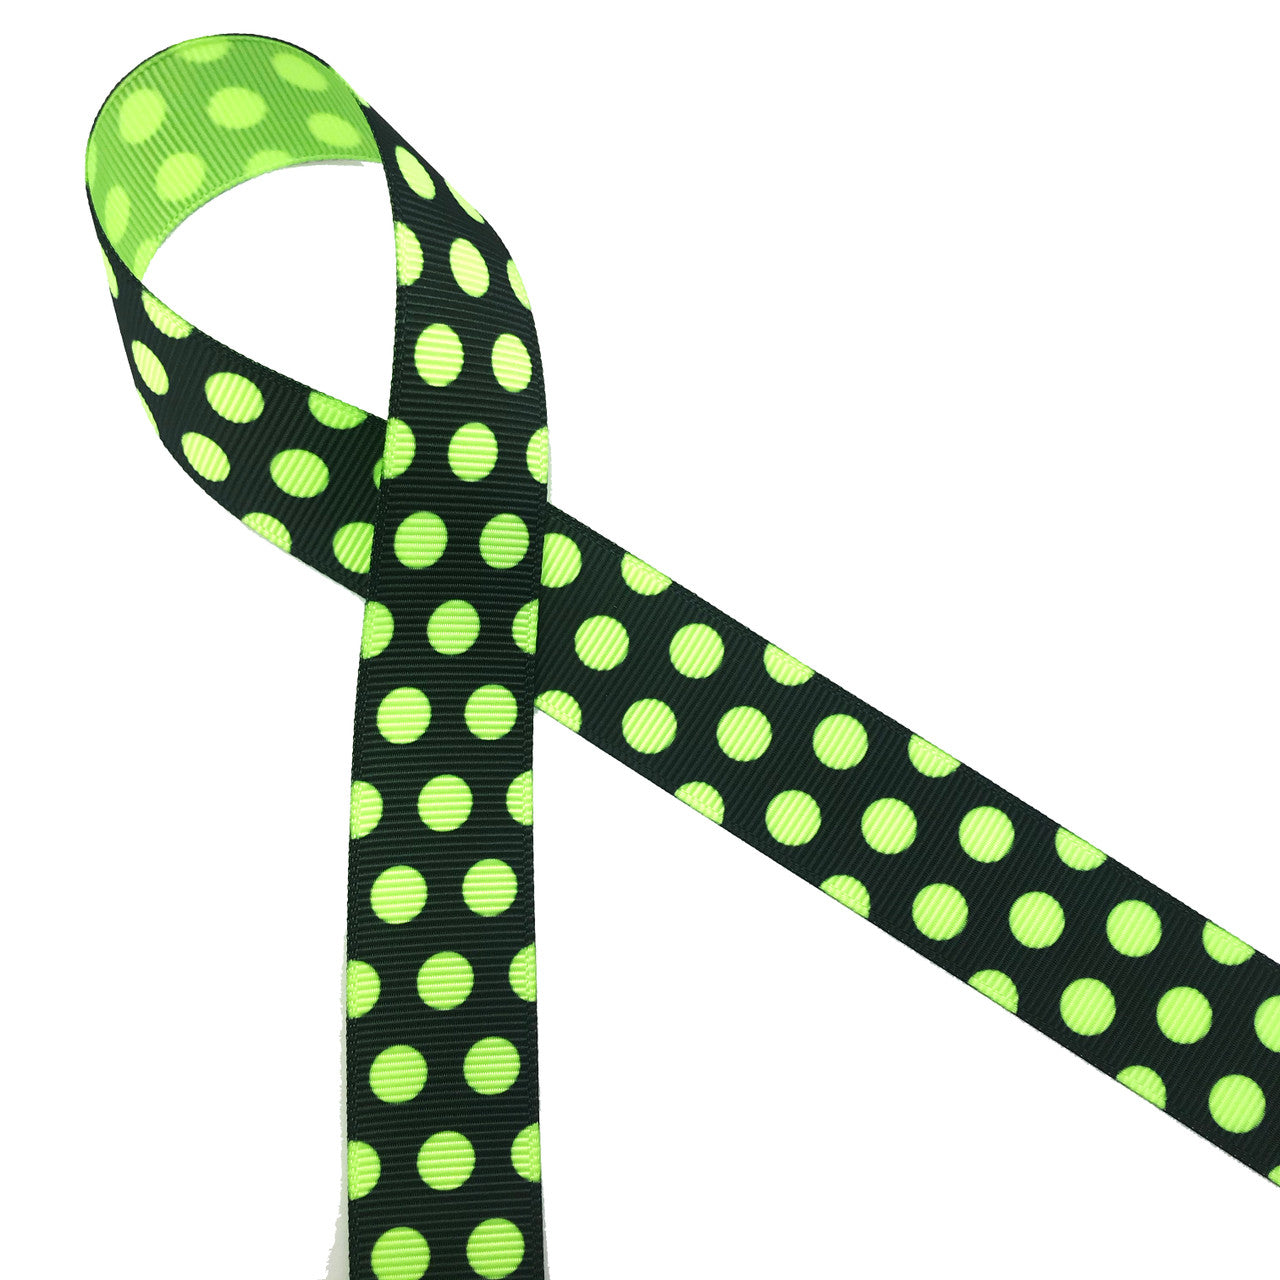 Neon green polka dots on a black background printed on 7/8" neon green grosgrain ribbon makes for a fun and scary Halloween ribbon for hair bows, decor and treats! Be sure to have this ribbon in your Halloween collection! Designed and printed in the USA